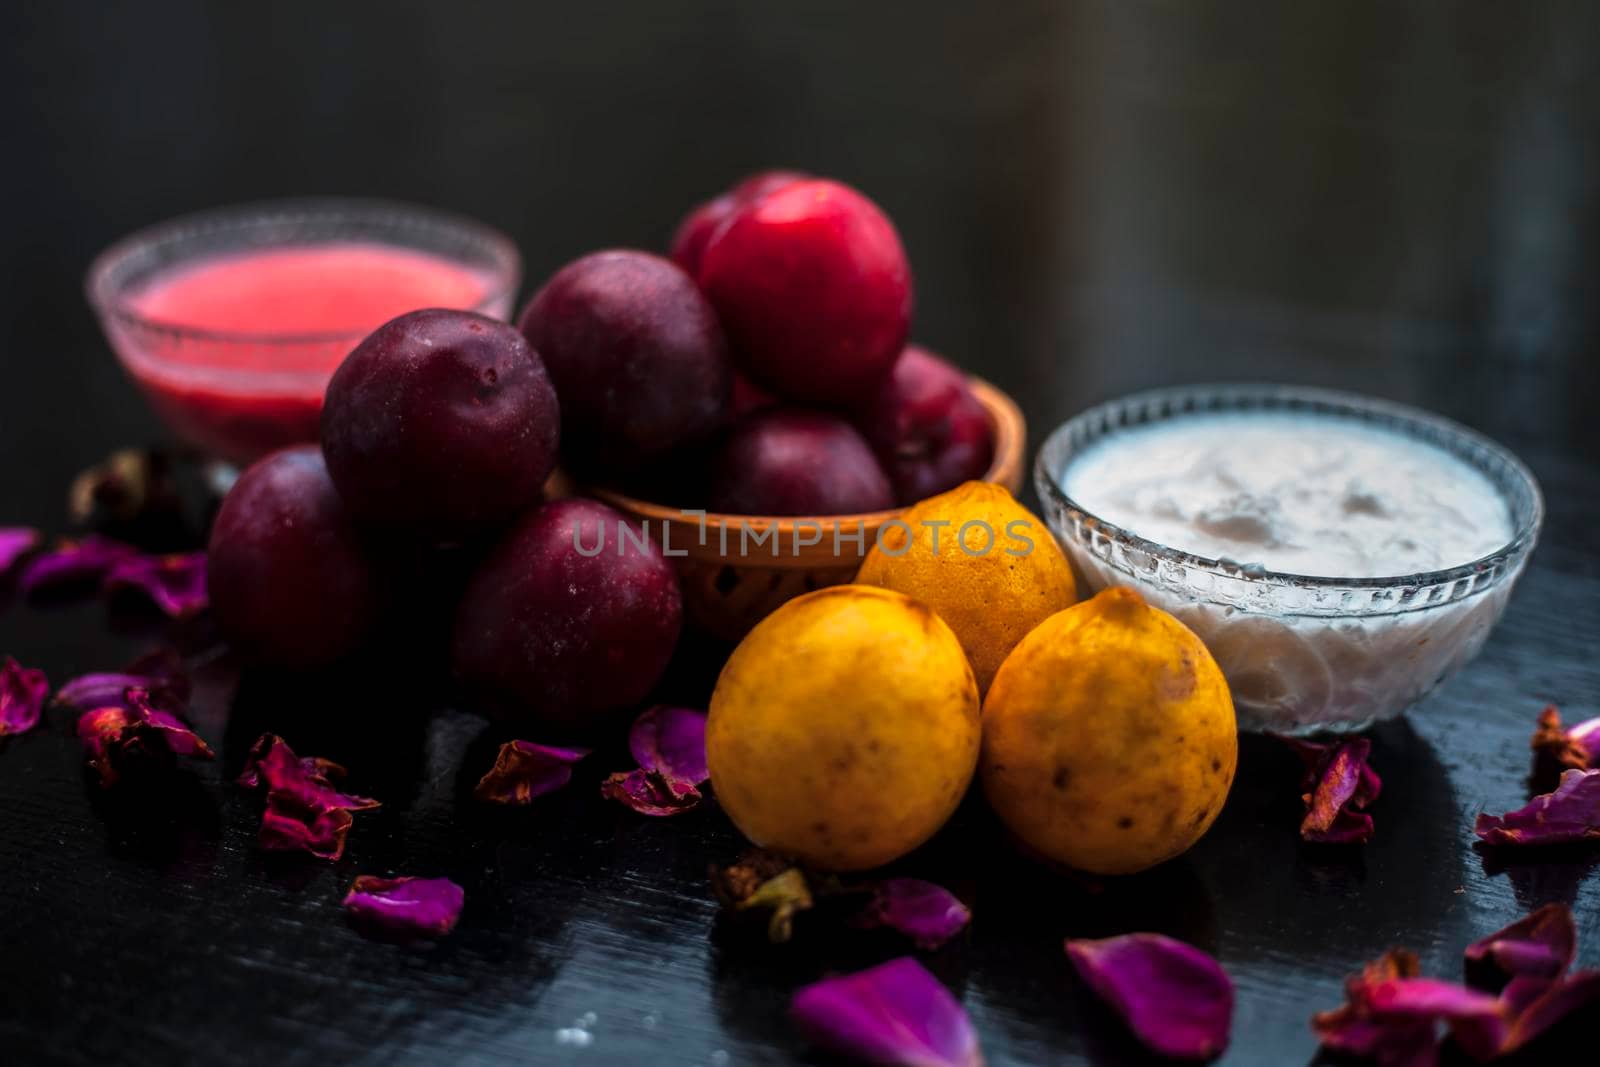 Healthy face mask of plum or aloo Bukhara in a glass bowl on the wooden surface consisting of plum extract, water, curd, and some lemons also for protection against harmful UV rays and sun damage.